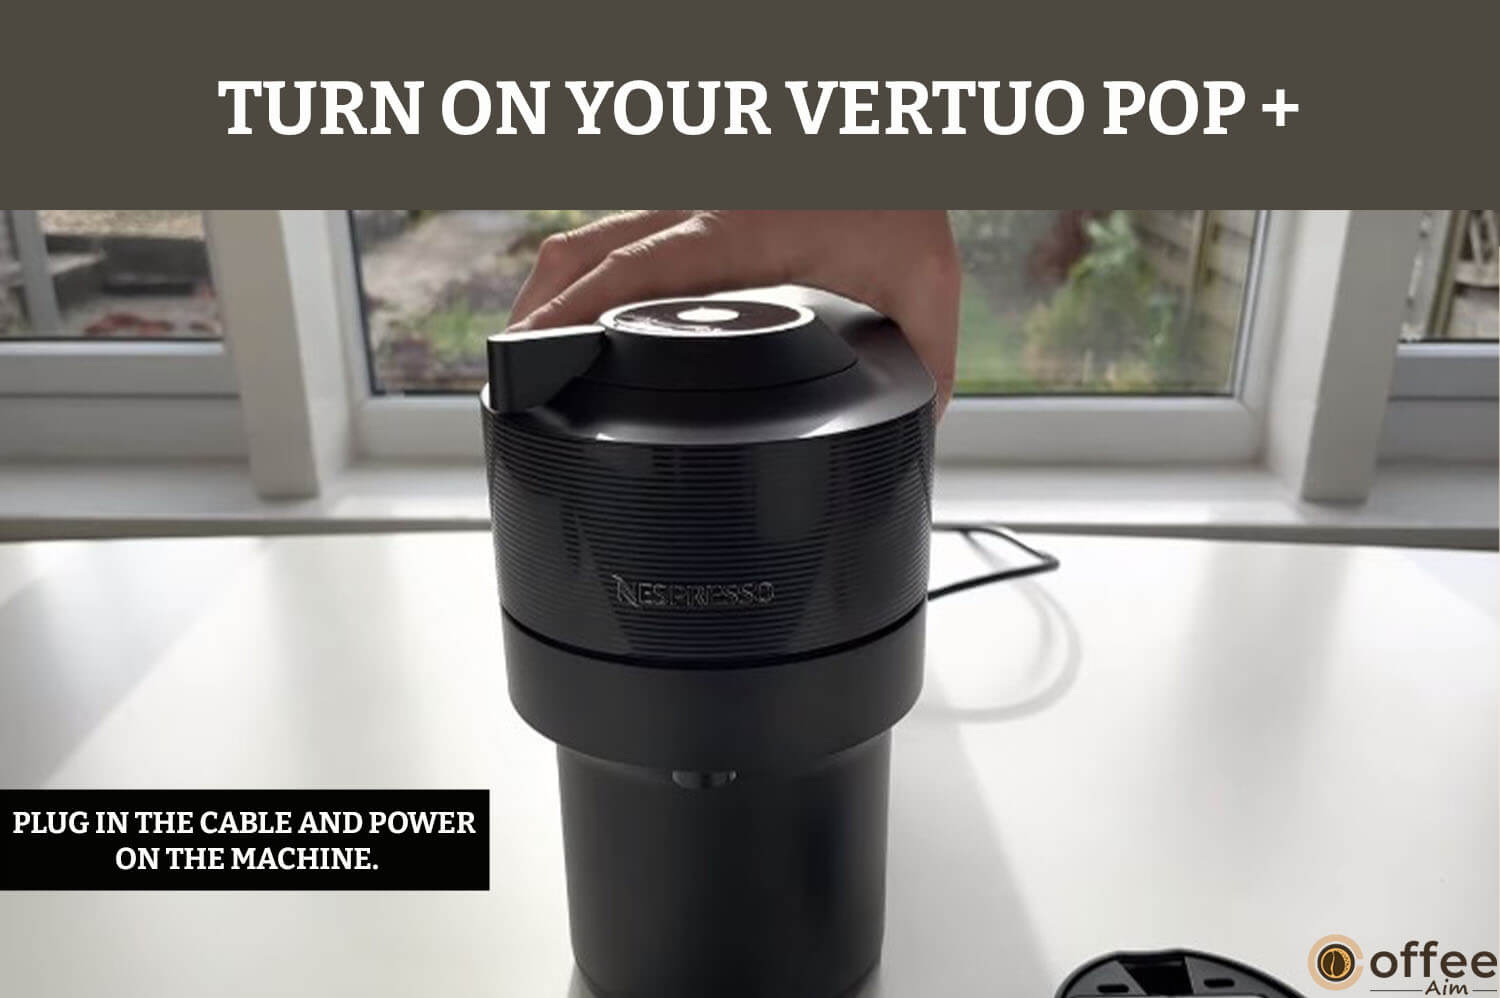 This image illustrates the process of activating your Vertuo Pop+ by plugging in the cable and initiating the machine, either by pressing the single button located on its head or by turning the lever to the left into the locked position. This step is detailed under the heading 'Turn On Your Vertuo Pop+' in the article 'Unboxing of Nespresso Vertuo Pop+."